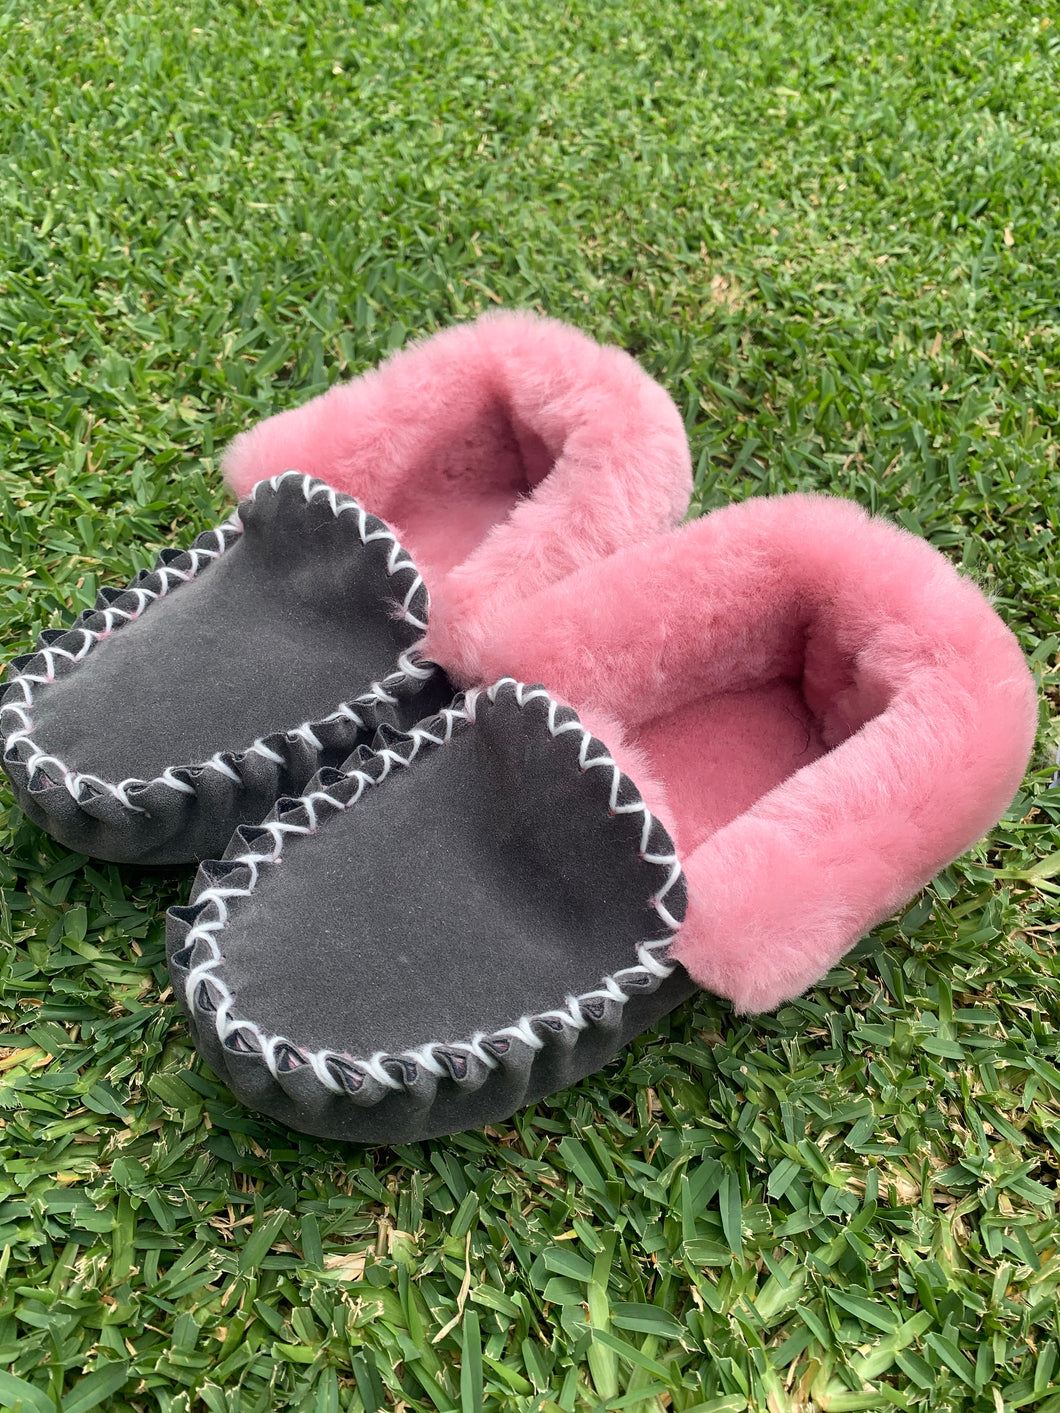 Thin Sole Moccasins - Grey/Pink